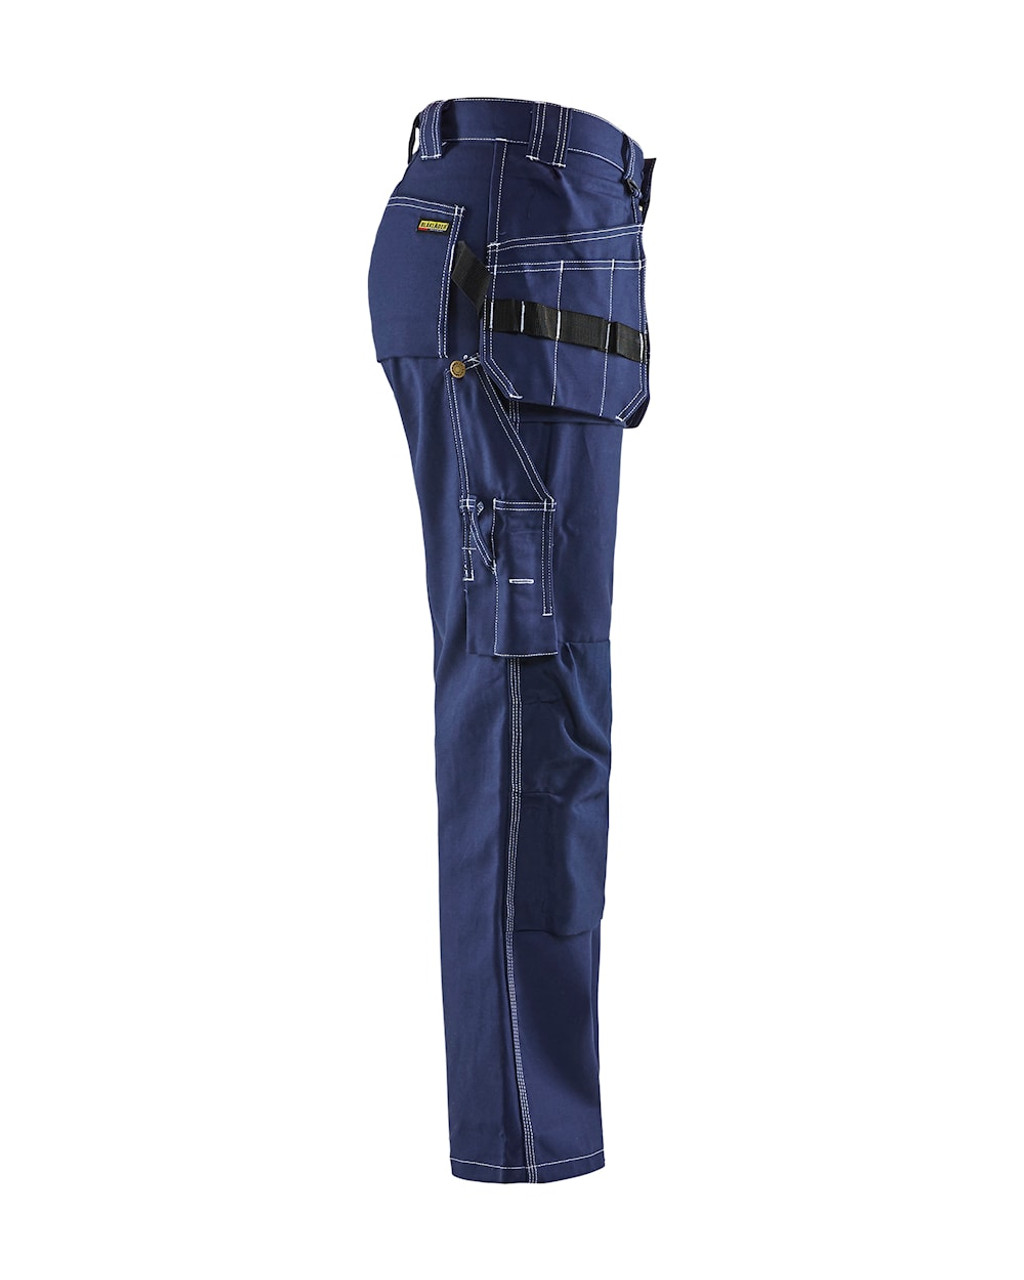 BLAKLADER Trousers | Cotton Craftsman Work Trousers , Womens Trousers with Holster Pockets with Womens for Carpentry and Electricians available in Sydney